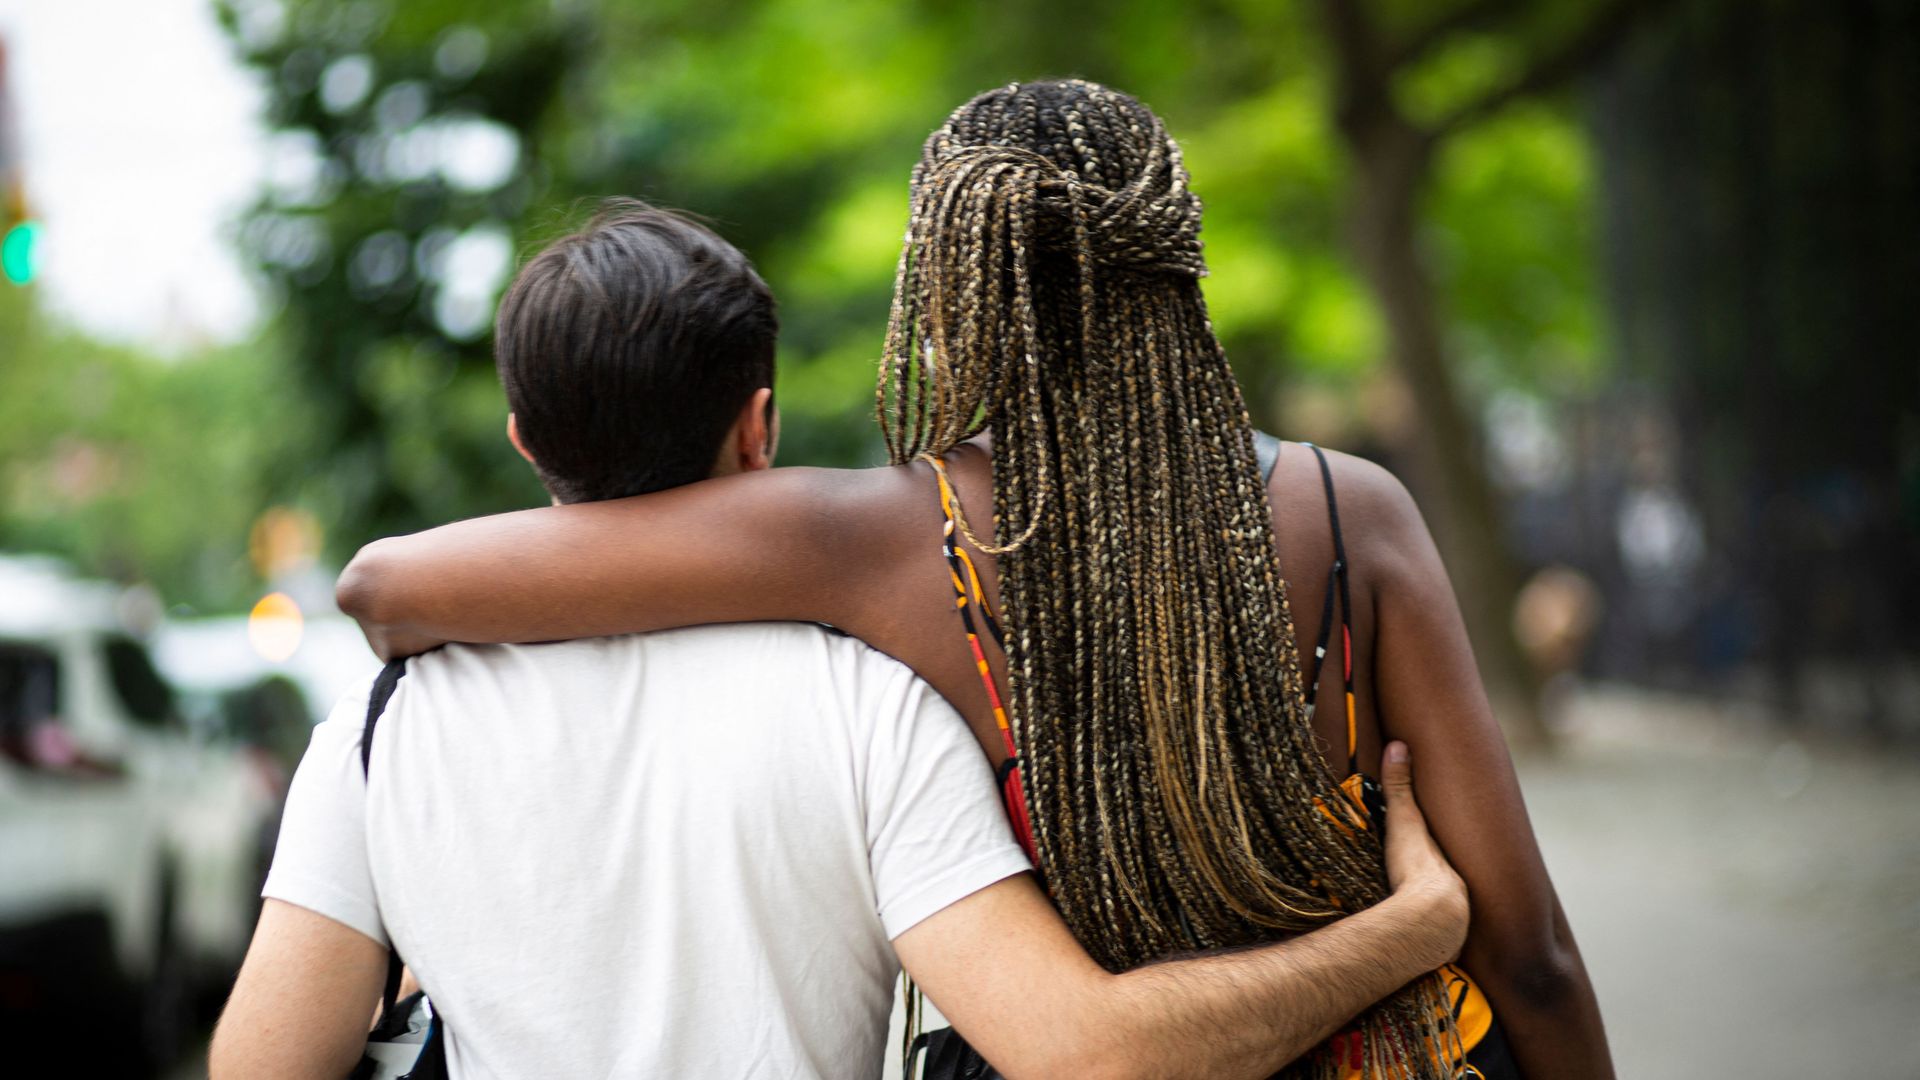 A man and a woman embrace each other as they walk during the 28th annual Juneteenth celebration in the Harlem neighborhood of New York.